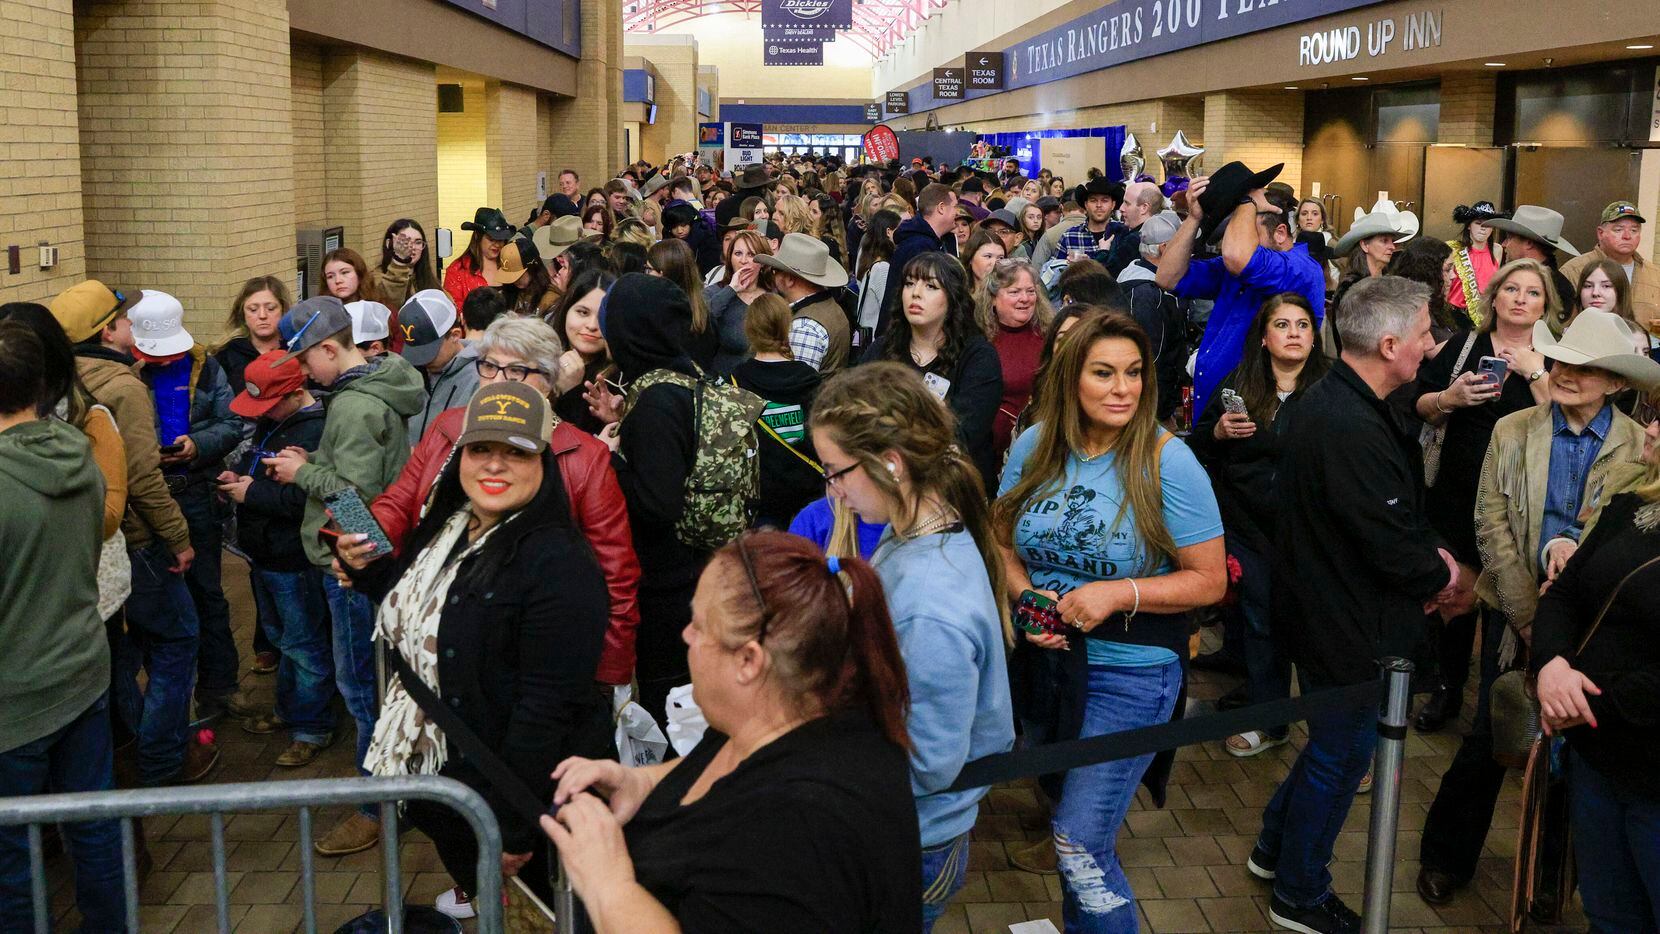 Hundreds of “Yellowstone” fans wait in line for autographs from show creator Taylor Sheridan...